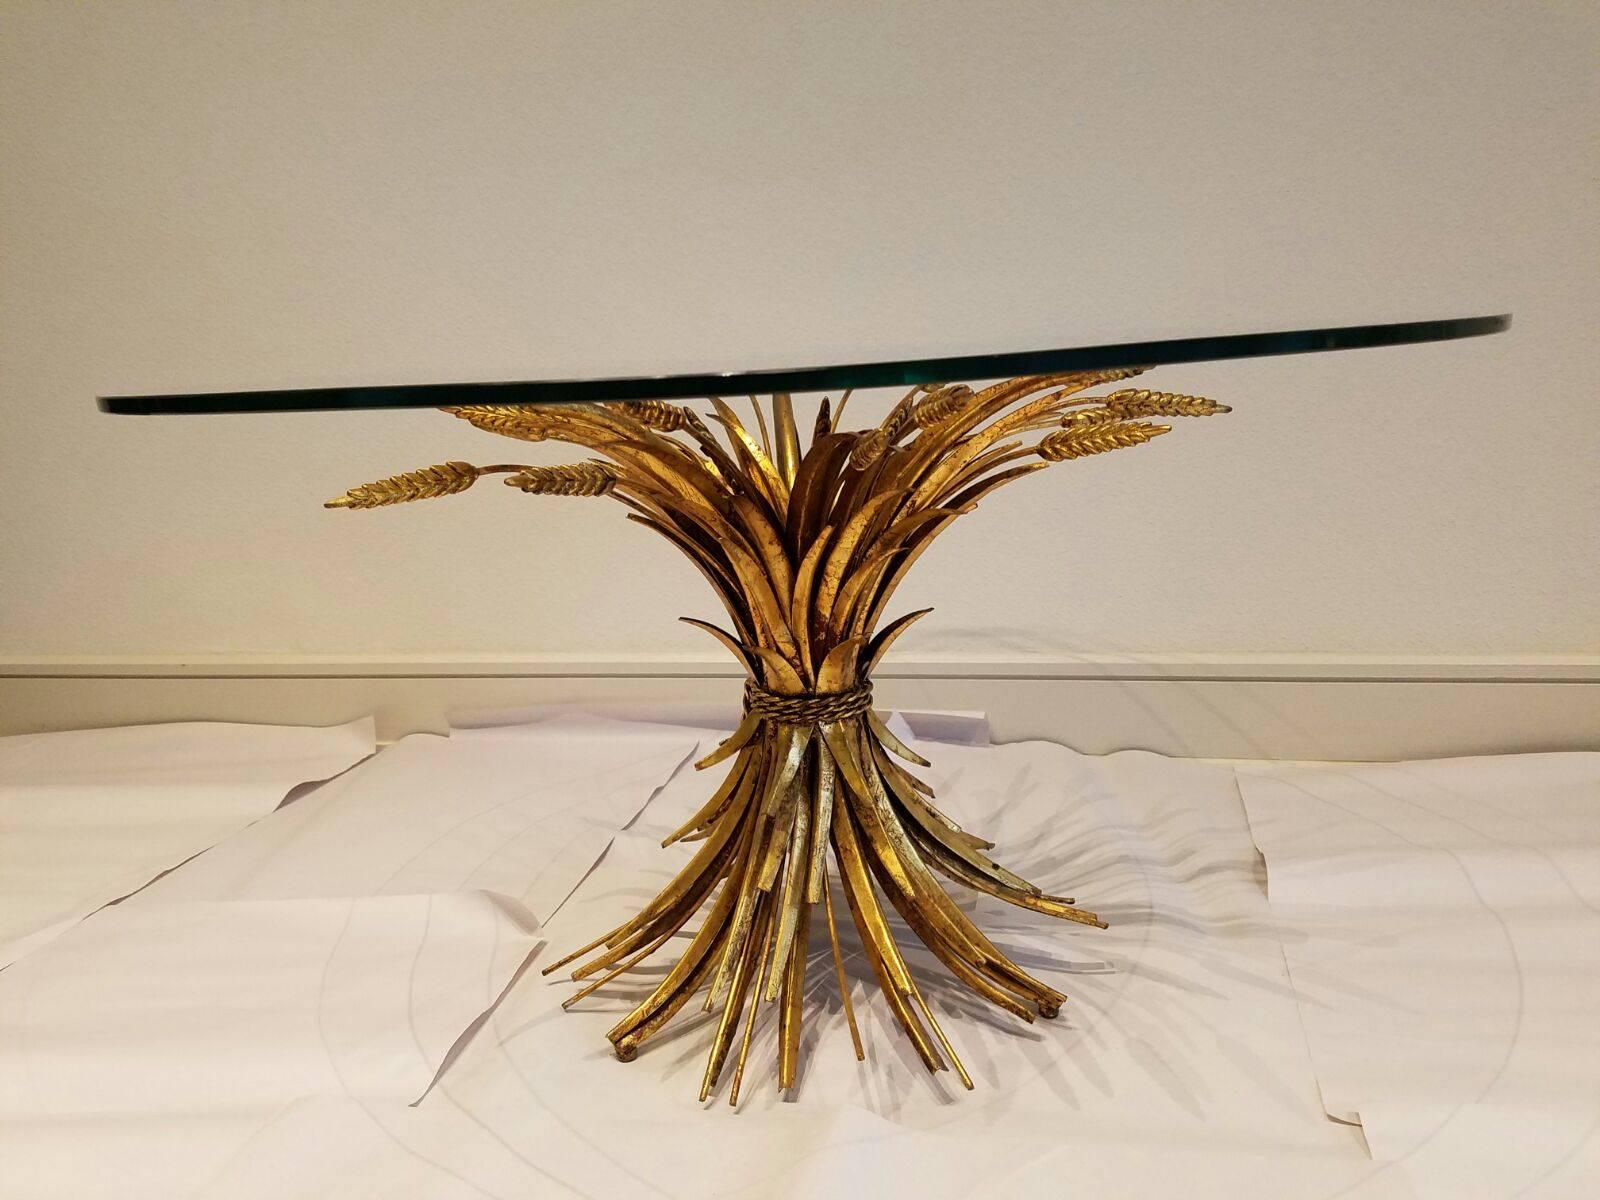 Offered is a 1960s era Hollywood Regency-style gilt wheat sheaf accent table with glass top. Made in Italy.